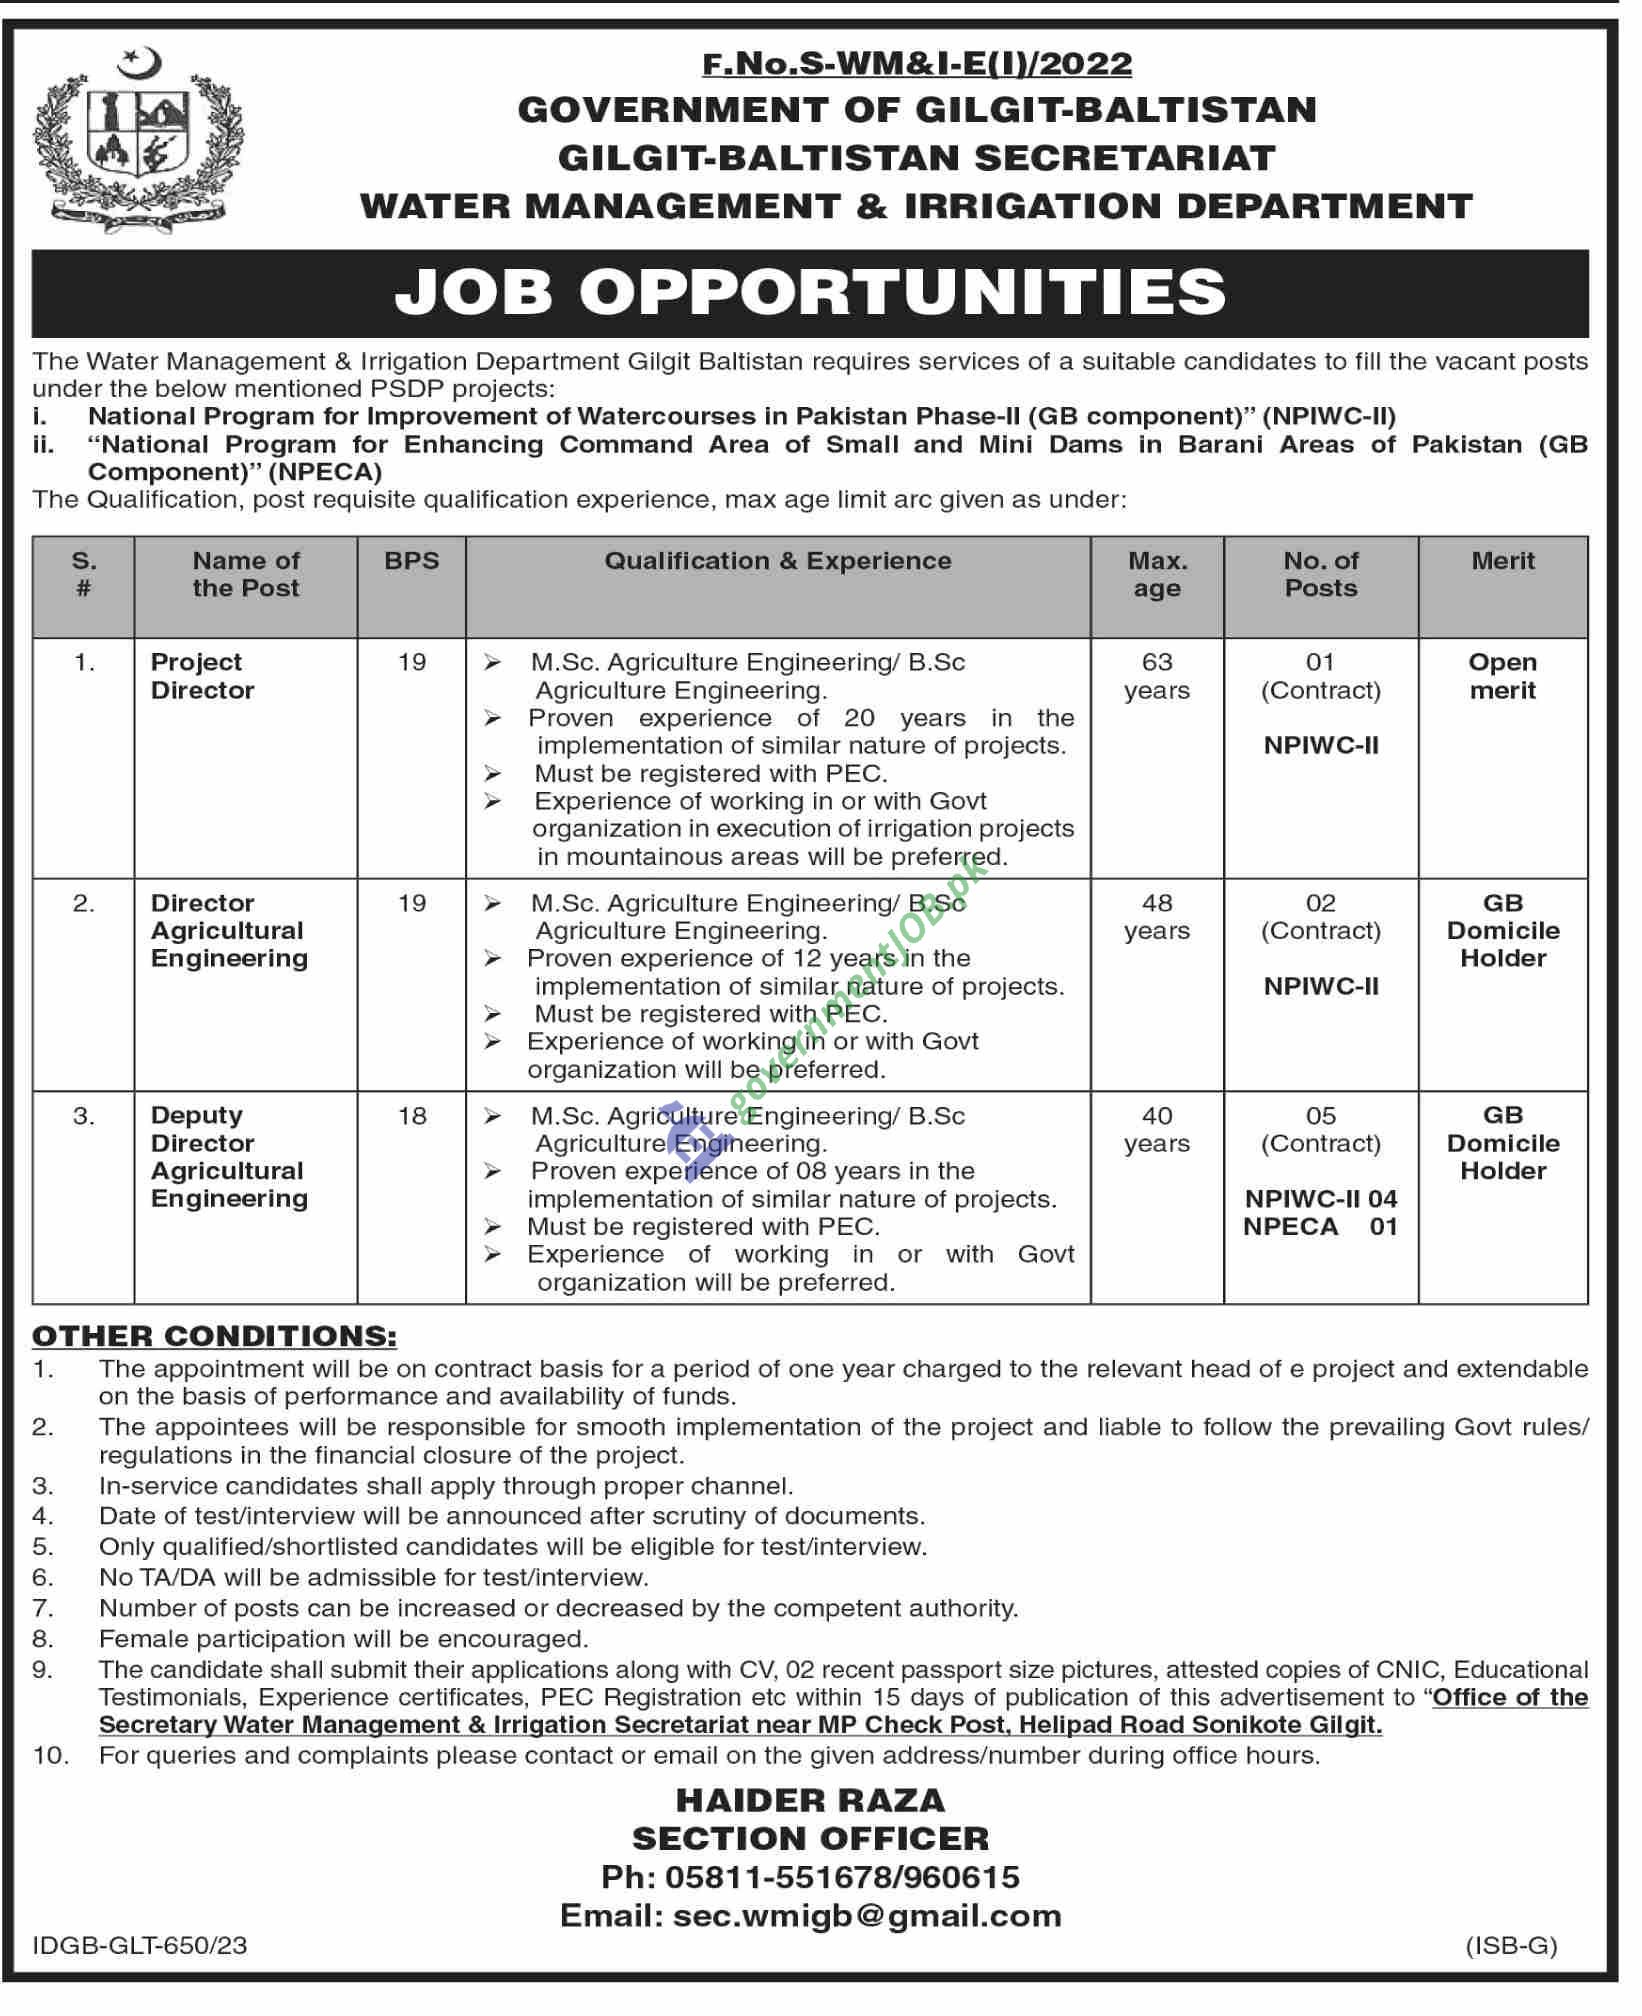 Gilgit Water Management and Irrigation Department Jobs ad 2023